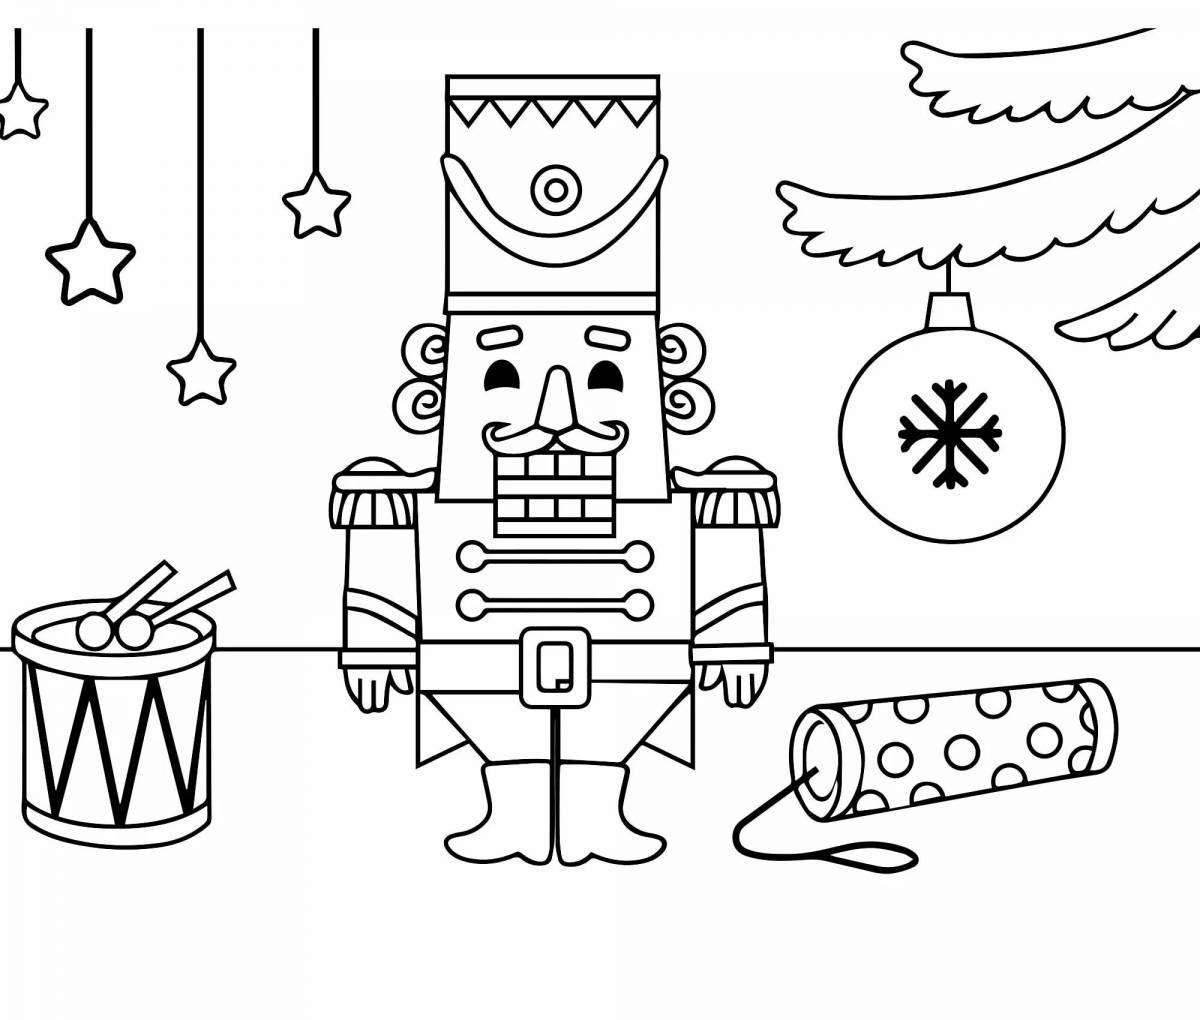 Nutcracker and Mouse King coloring page in vibrant colors